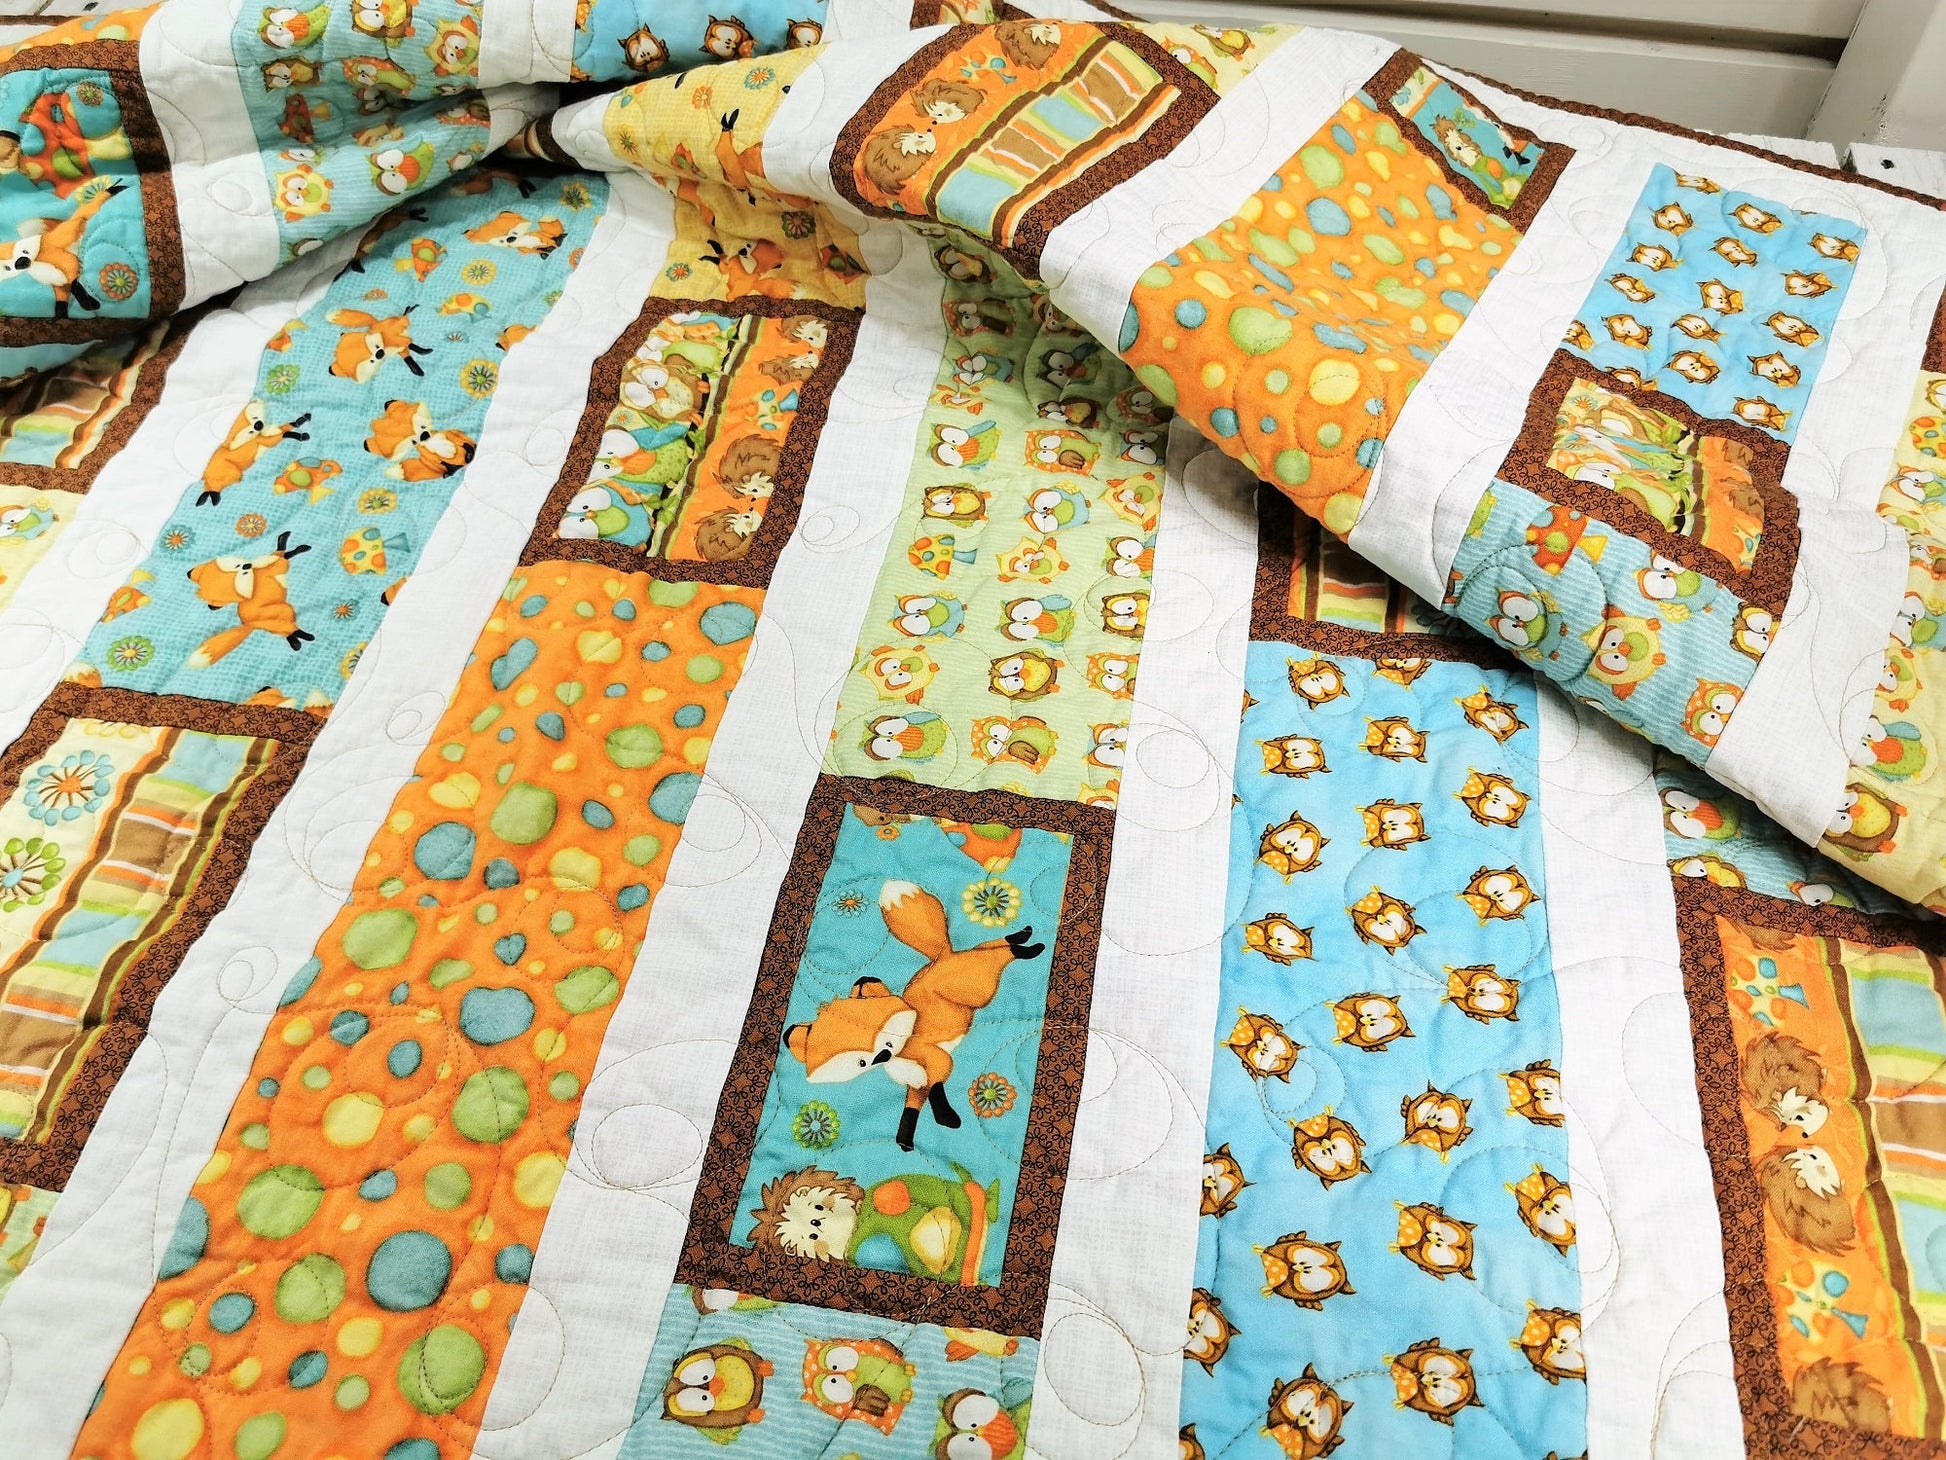 This modern toddler quilt has colorful stripes of cute animal fabric. See Owls, foxes, hedgehogs, mushrooms, dots, and more